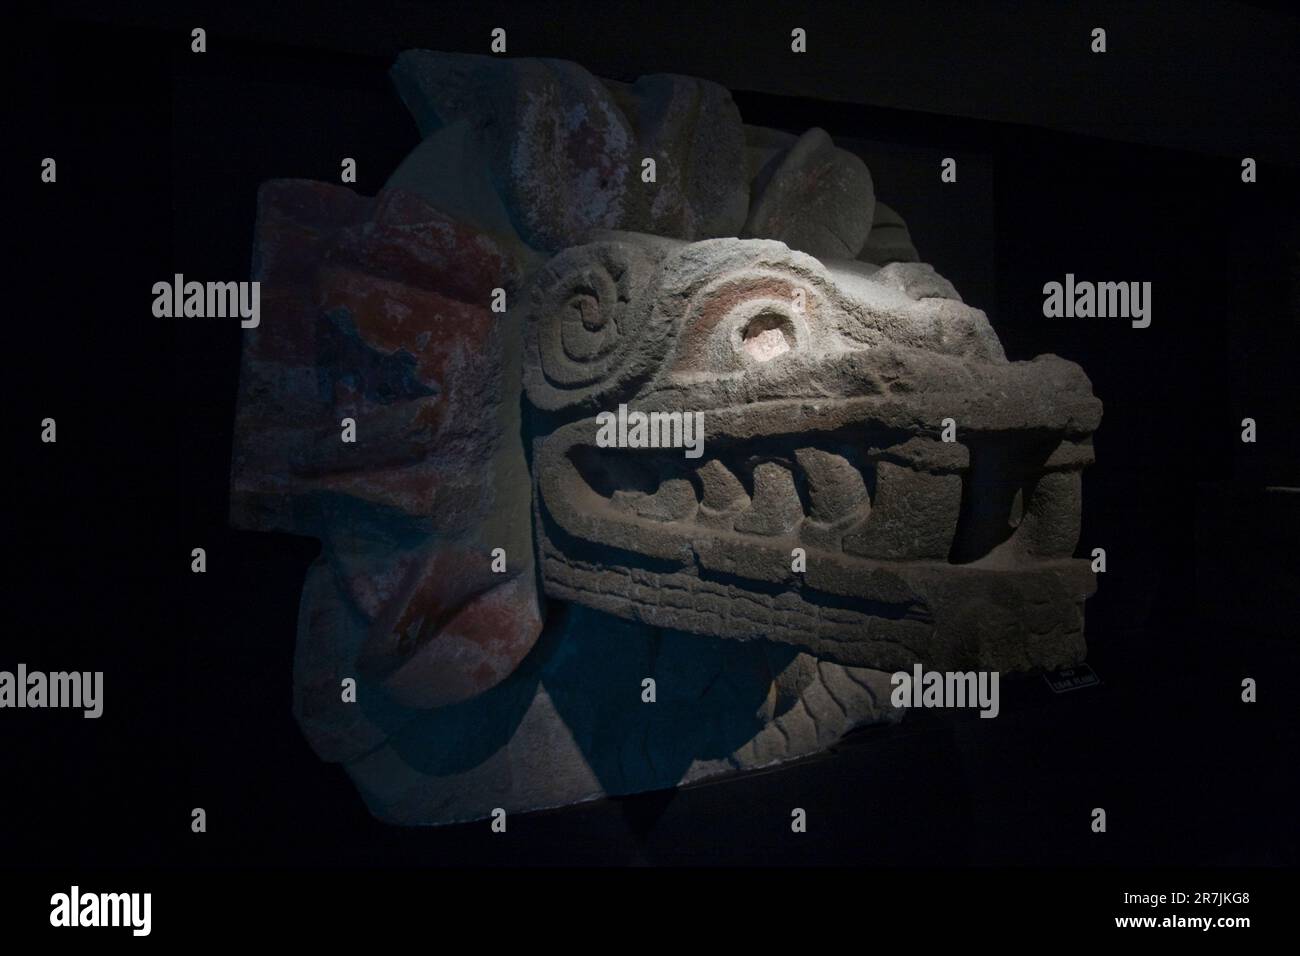 A stone sculpture of the plumed serpent Quetzalcoatl at the archeological site of Teotiuacan, Mexico state, Mexico. Stock Photo